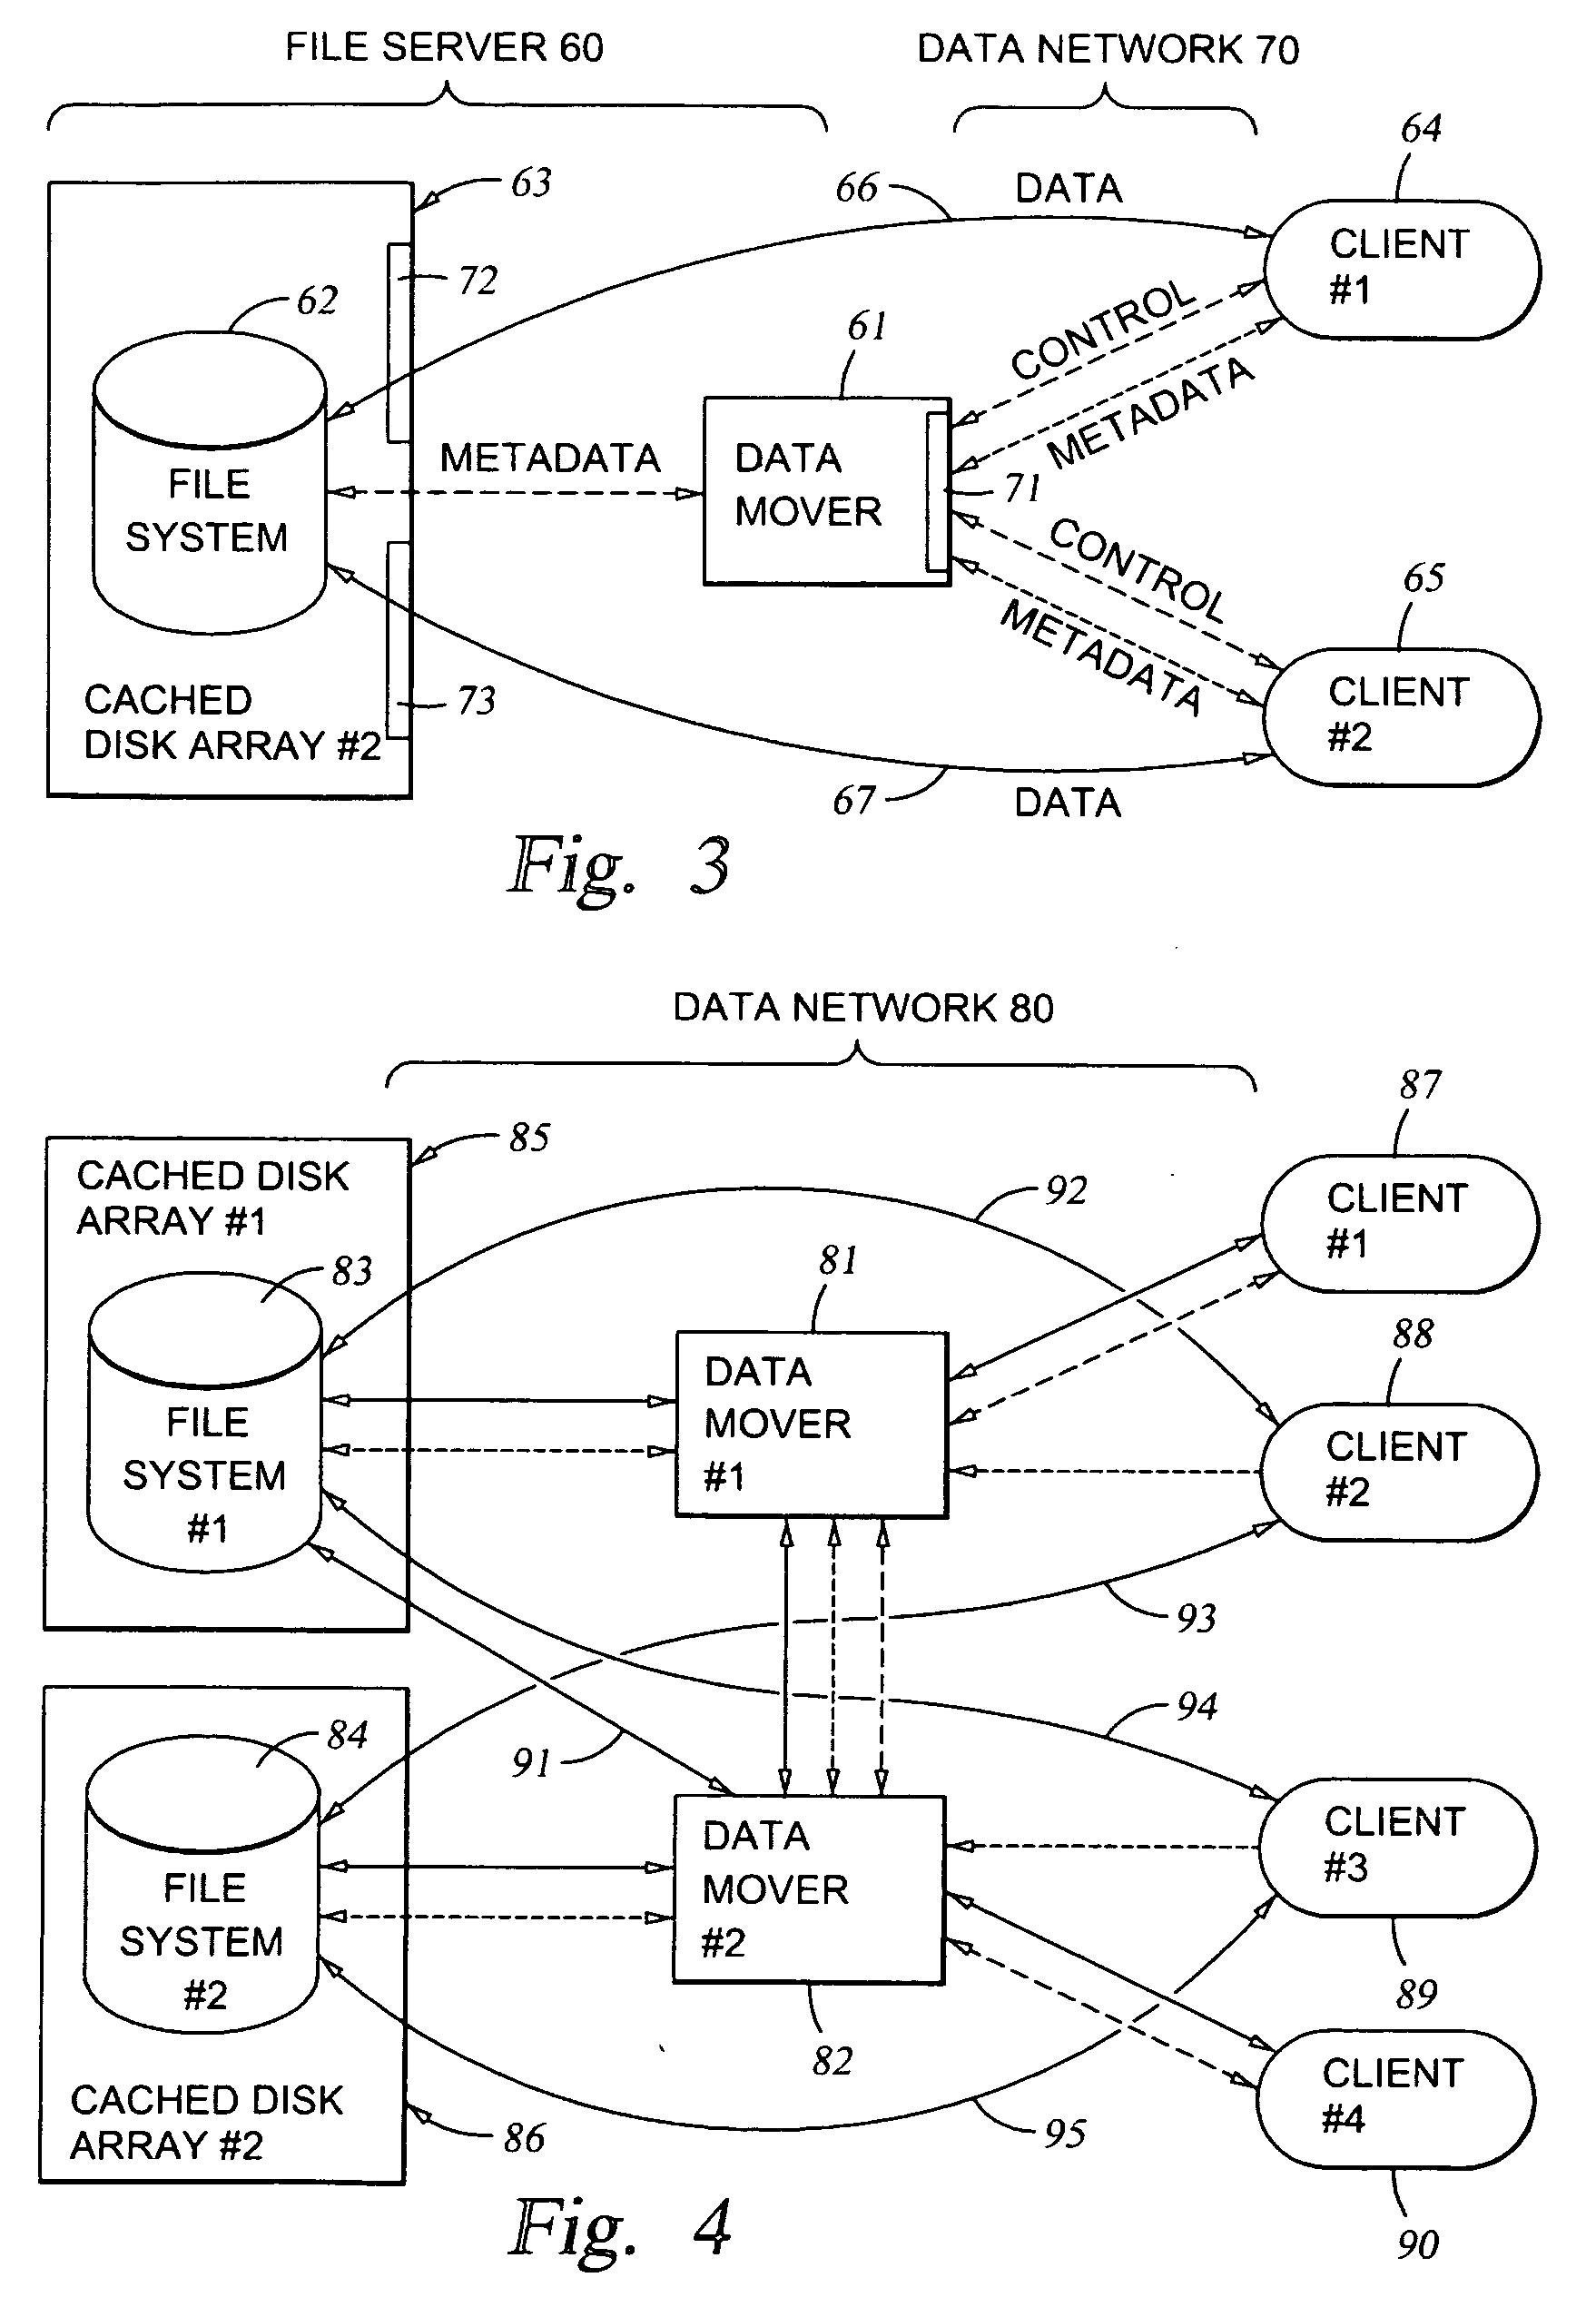 File server system providing direct data sharing between clients with a server acting as an arbiter and coordinator